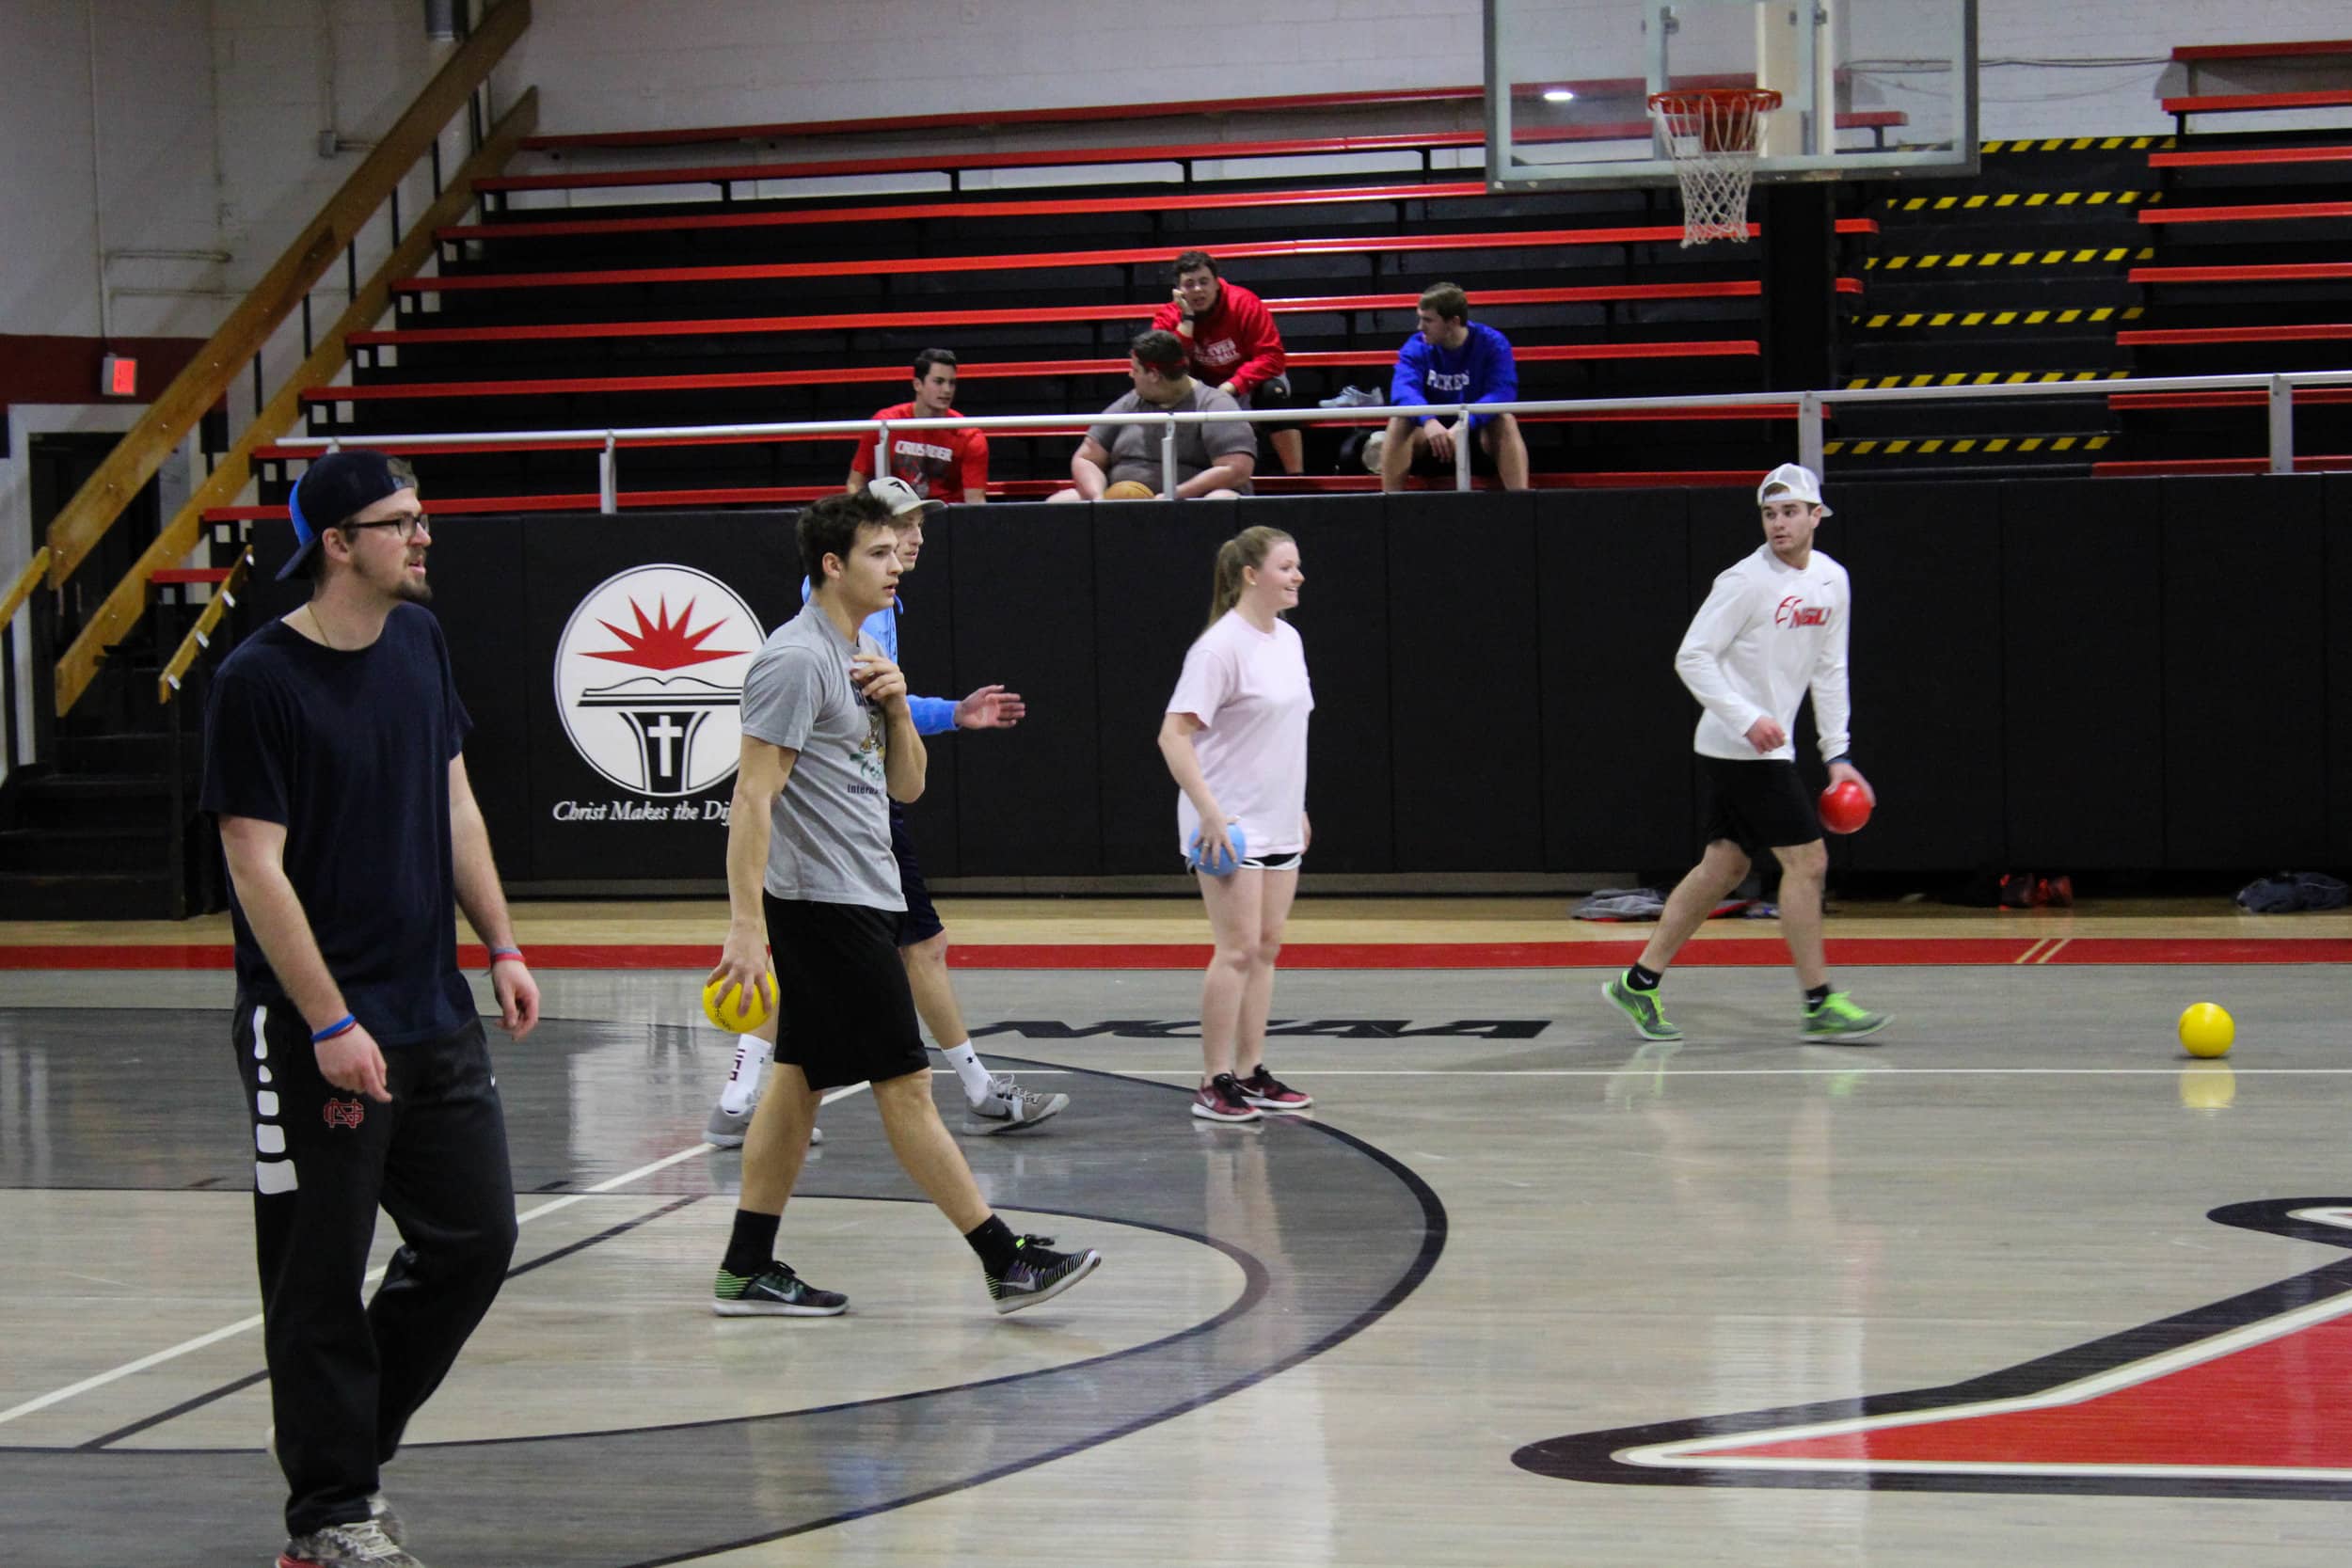 Photo Courtesy of Kenzie WebbPeople engaged in an intense game of dodgeball: (left to right) Bryce Allen, Josh Moore, Abby Malcom, Luke Raines